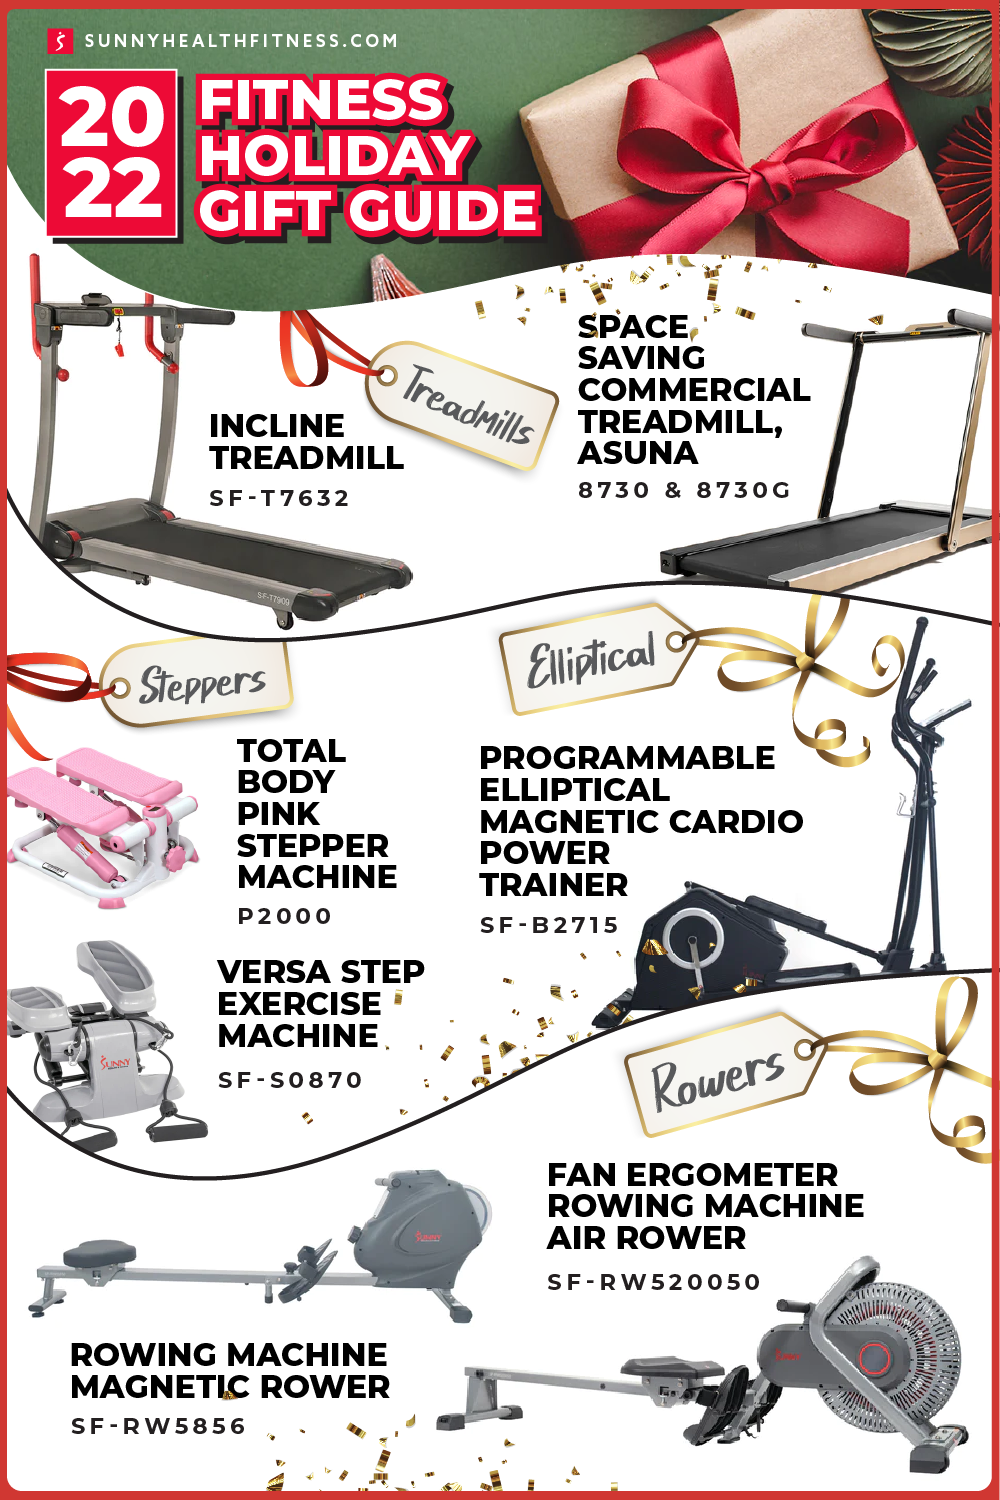 2022 Fitness Holiday Gift Guide - Exercise Equipment Infographic 2